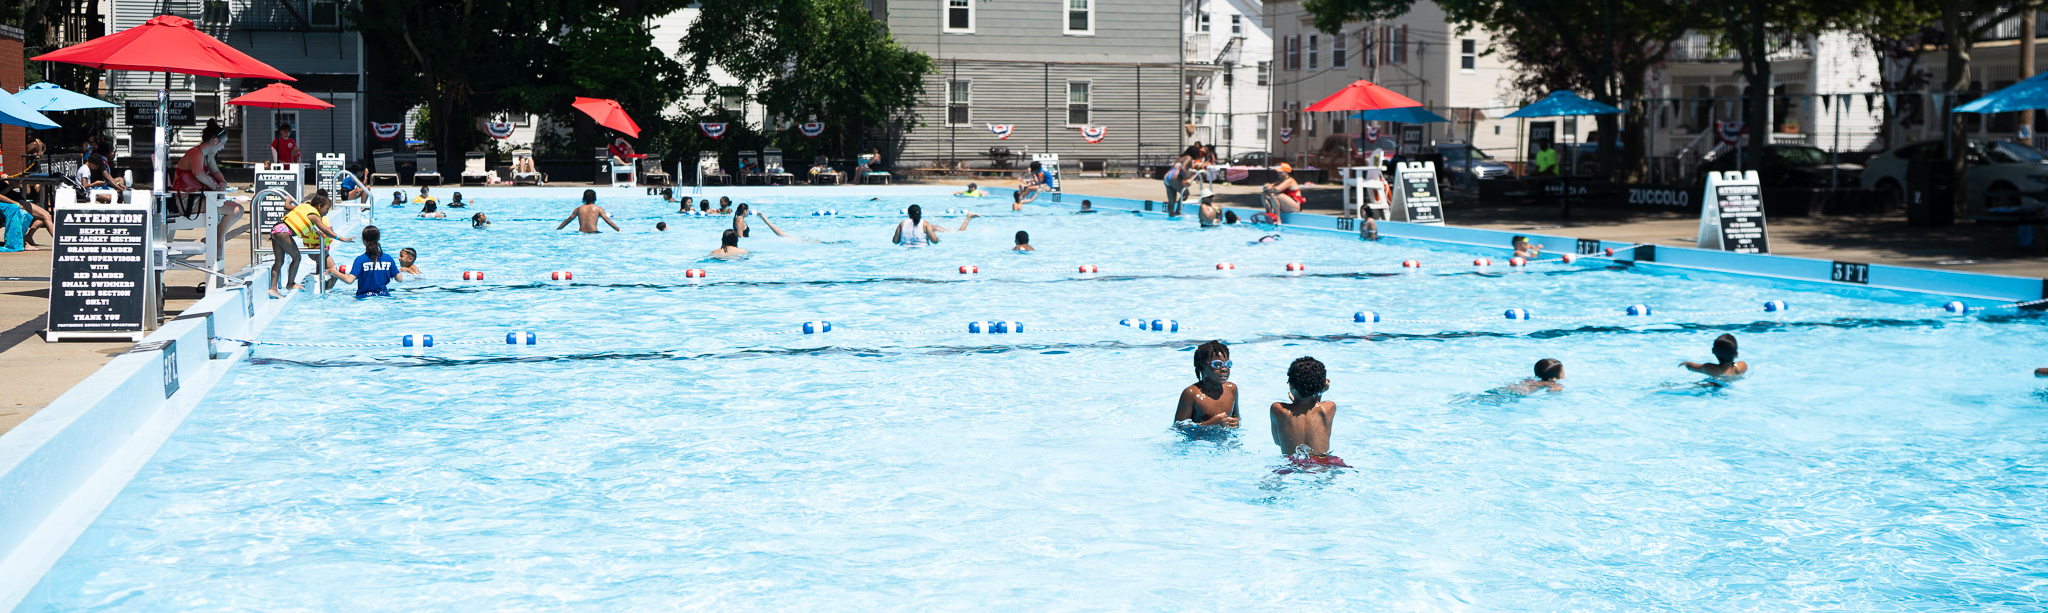 Heat Advisory: Extended Hours for Splash Pads and Pools